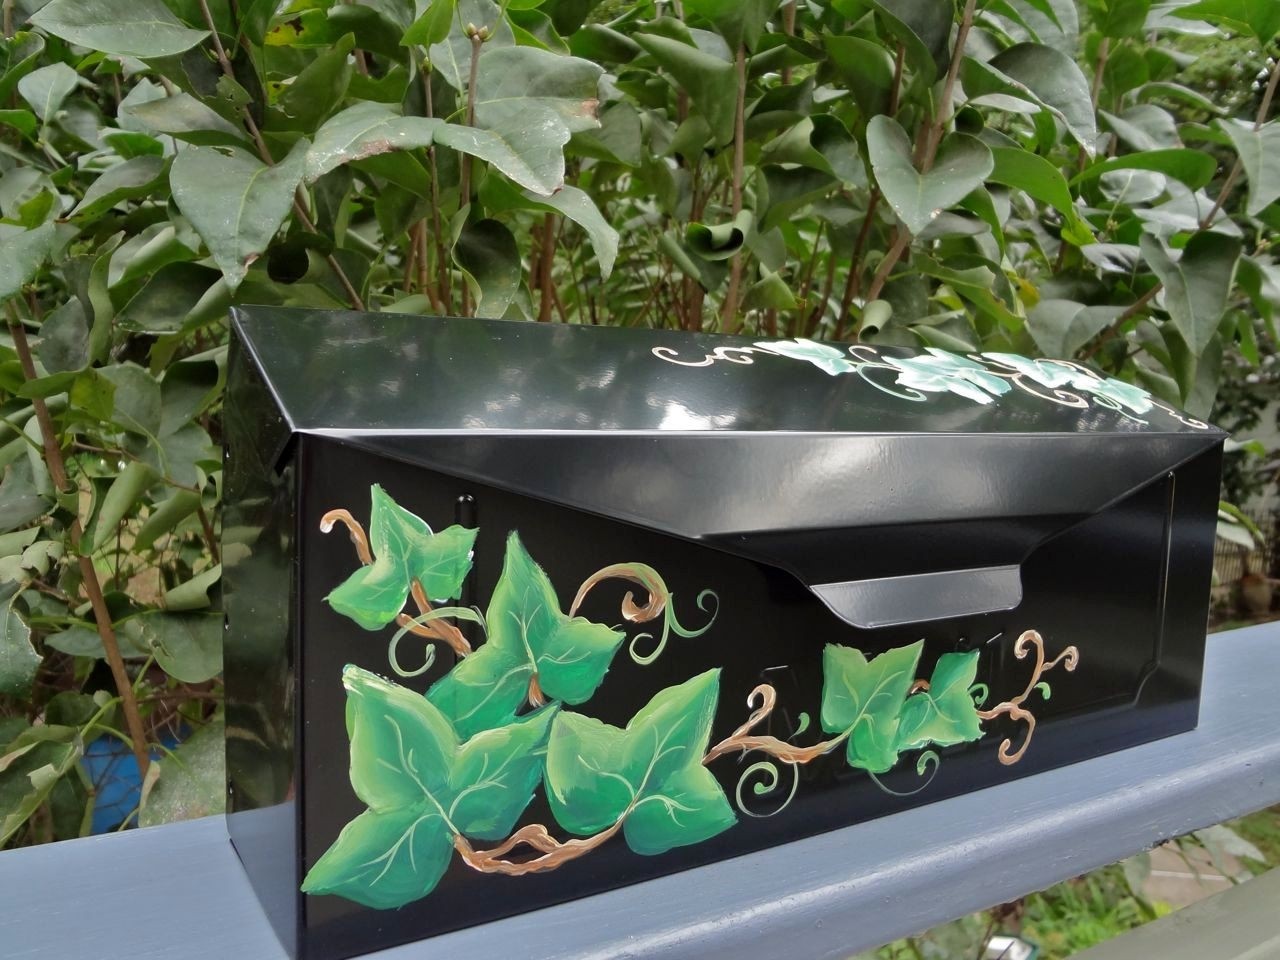 Hand painted mailbox with green ivy vines on a black